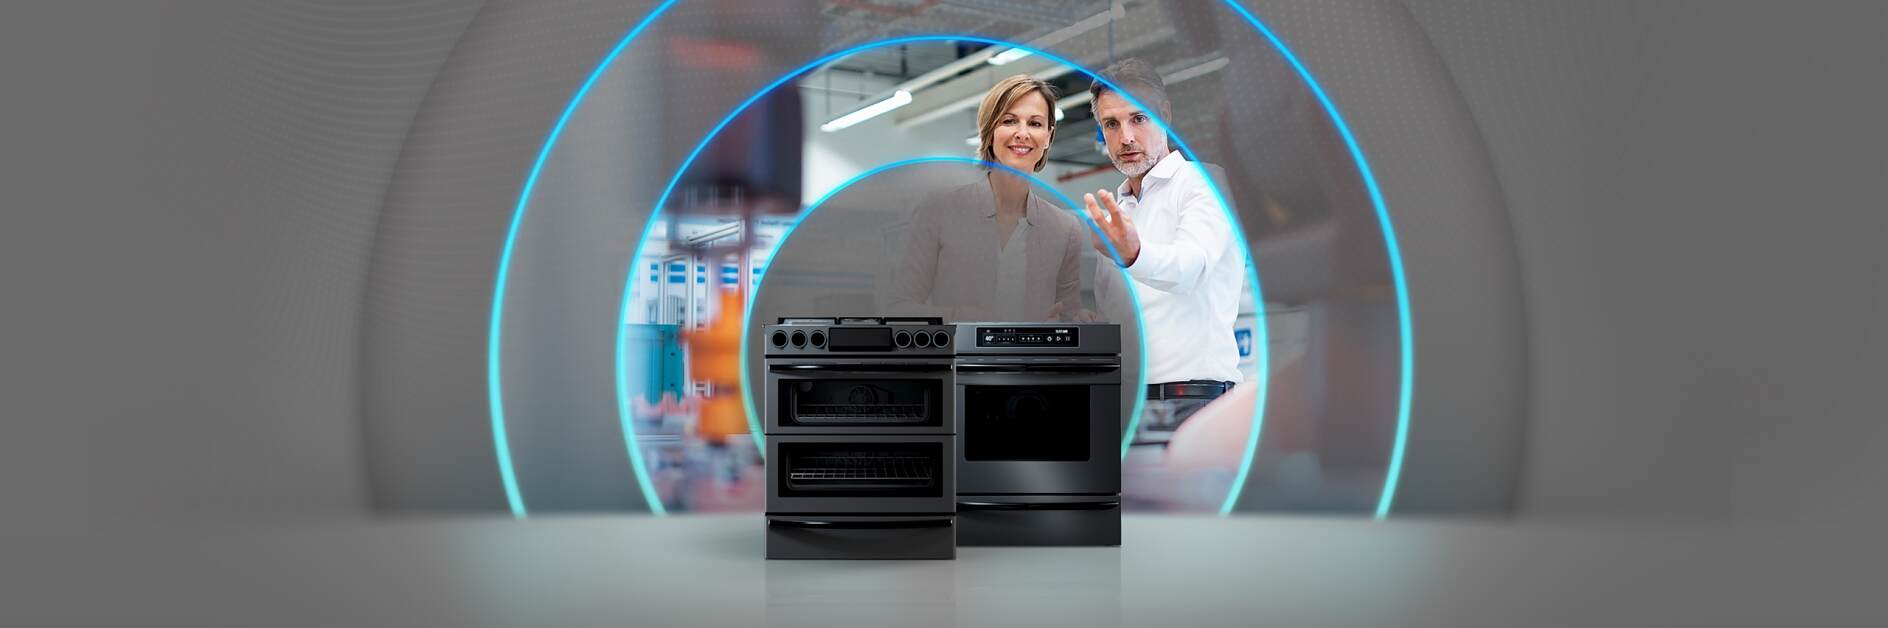 Appliances oven and cooktop banner